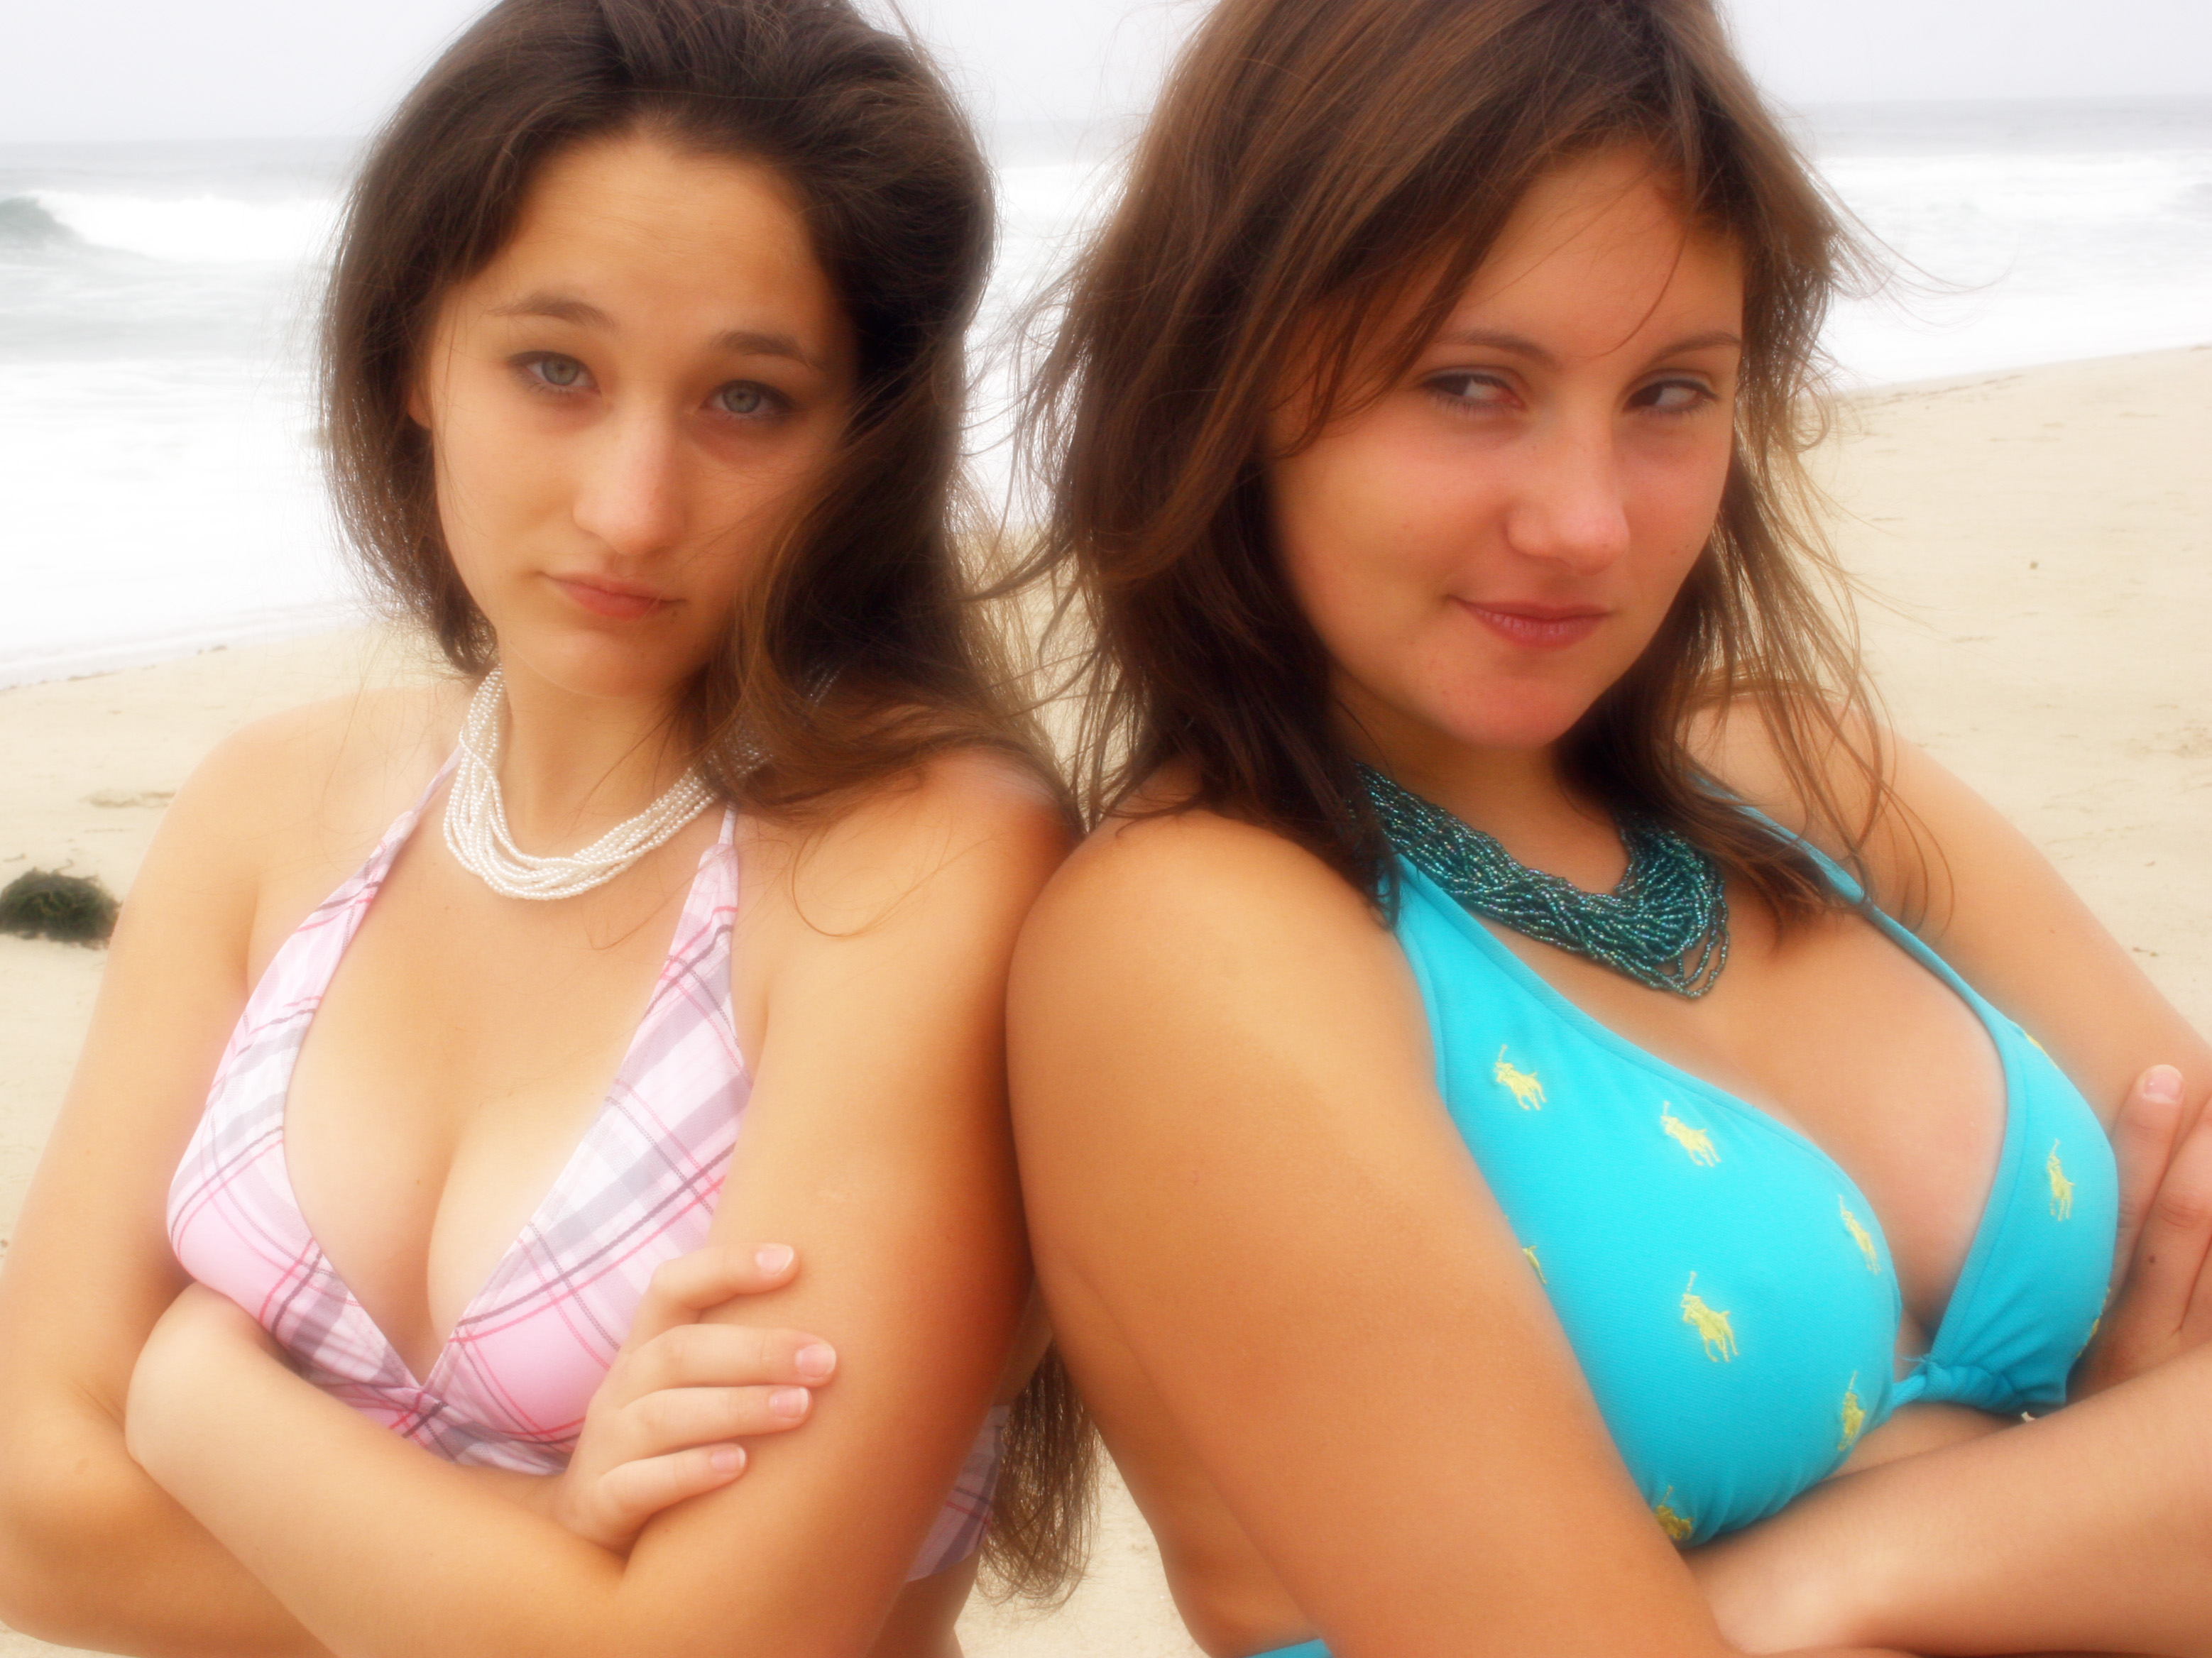 Lana and Nadia shot together and alone, up and down the beach, in a variety...